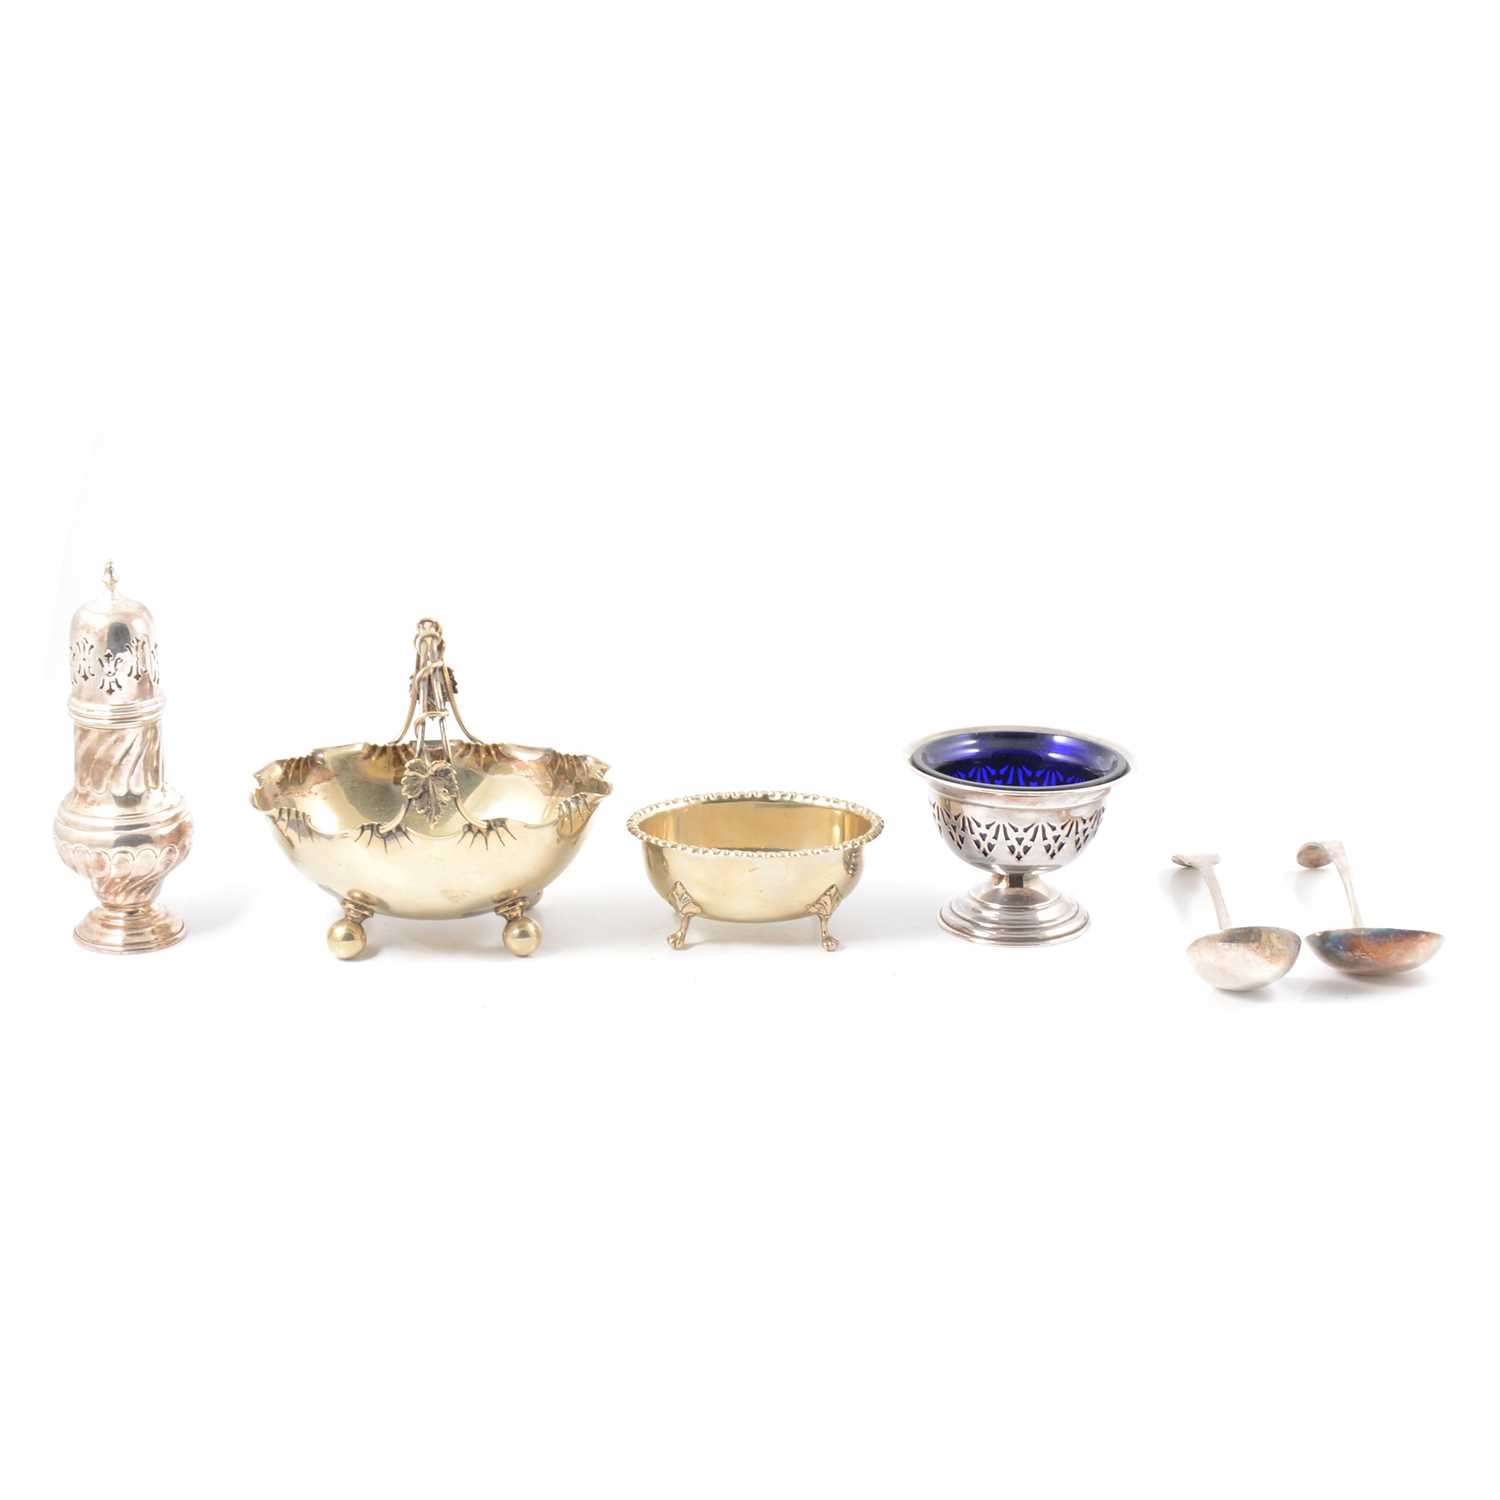 A small quantity of silver-plated items